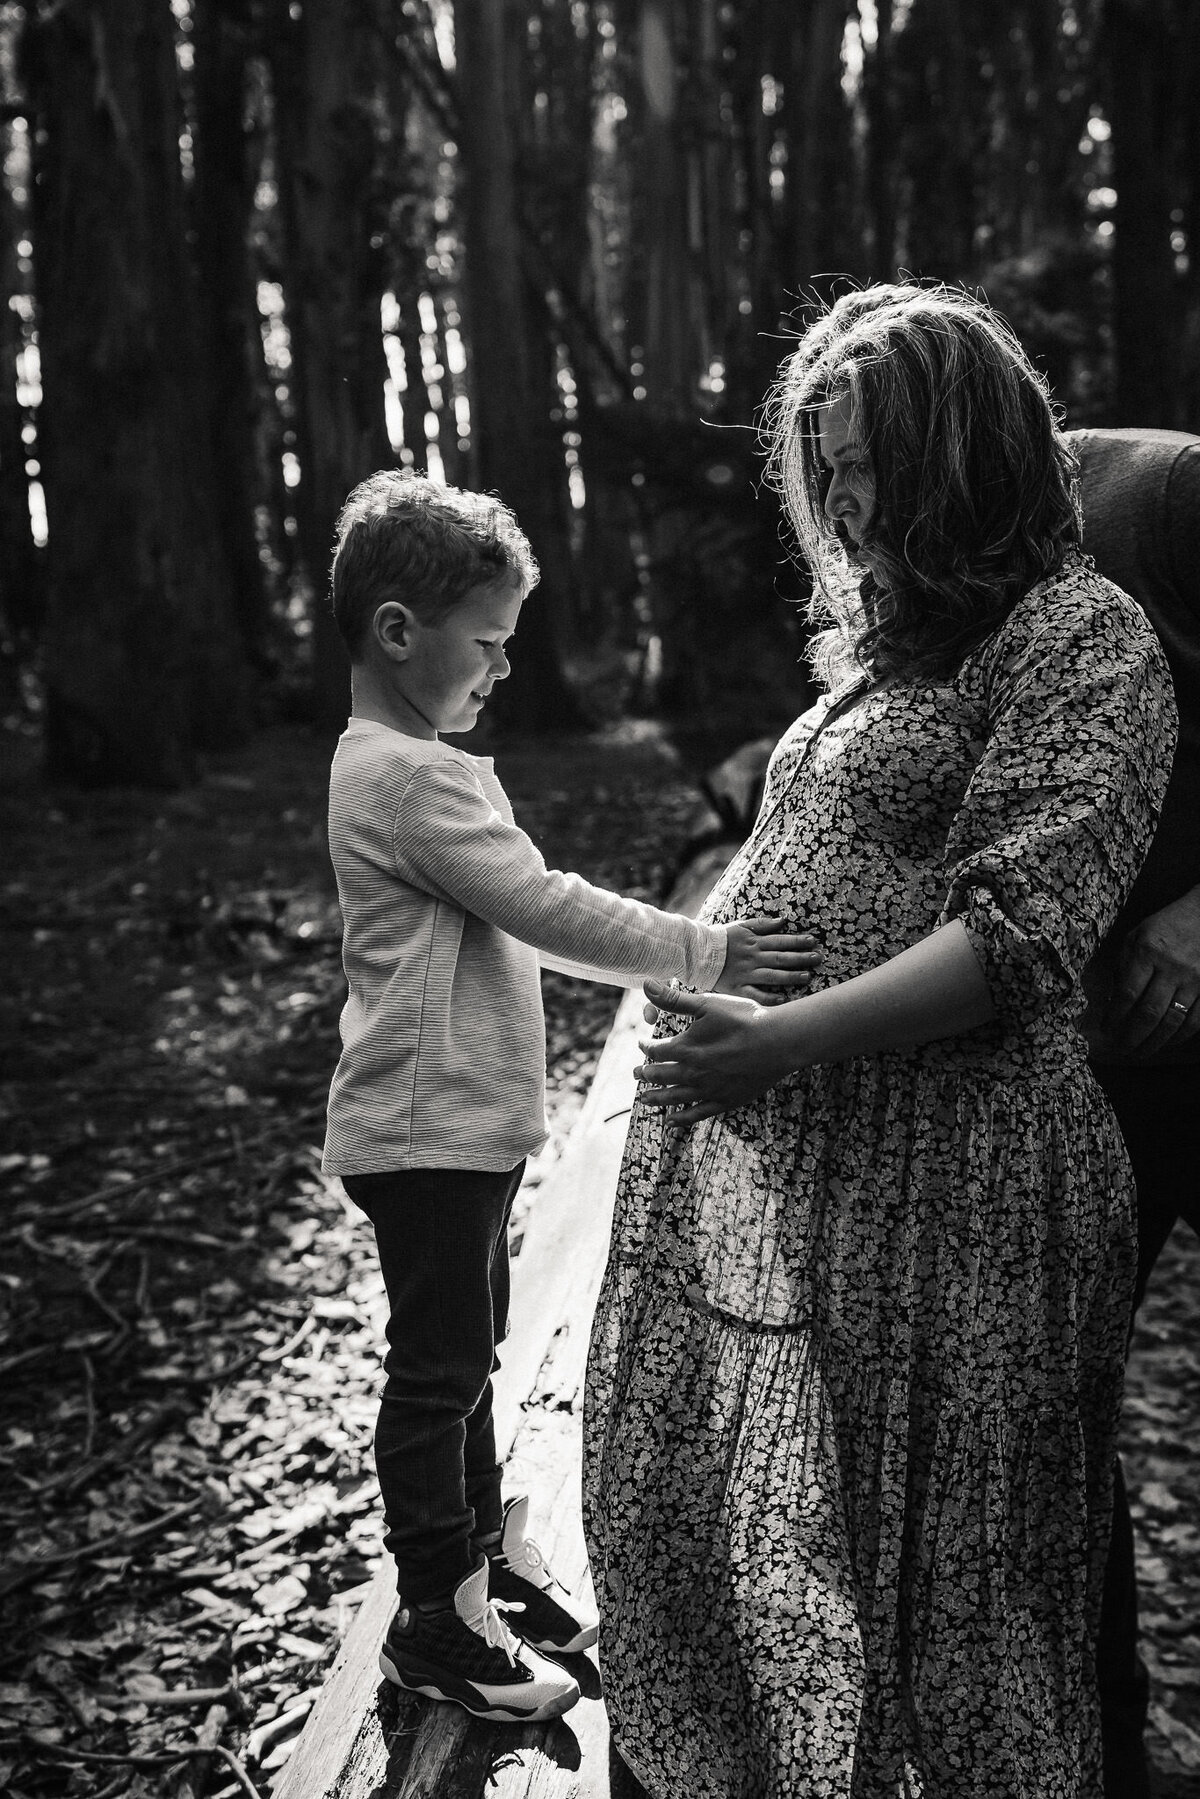 San Francisco boy touches mom's pregnant bellw with both hands.  Black and white backlit  photo